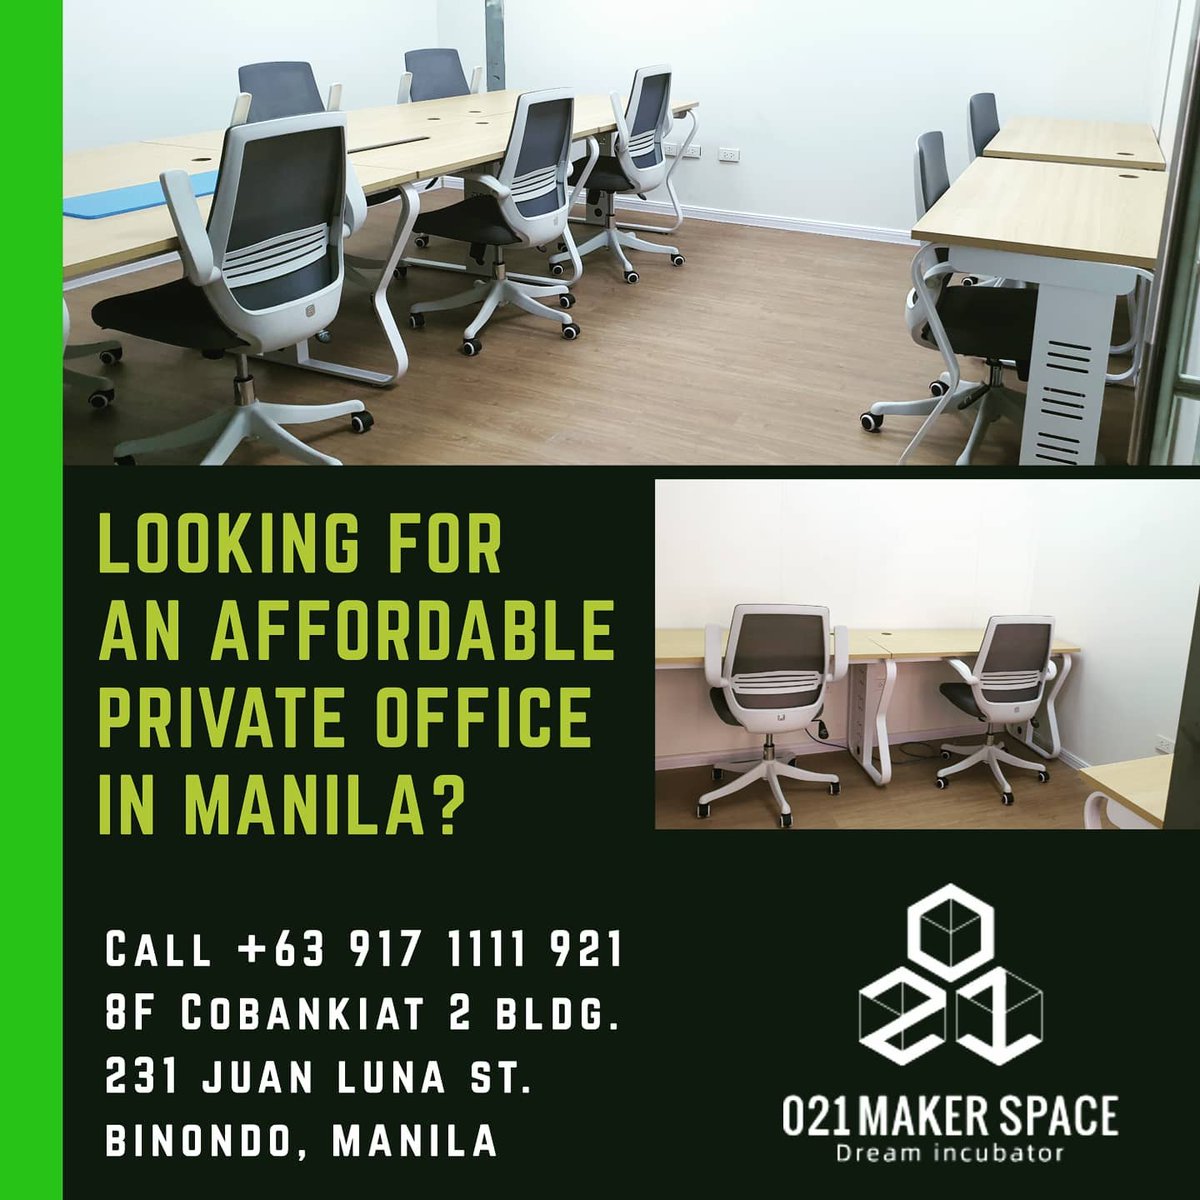 Are you looking for a Private Office in Manila? We've got you covered! We have #privateoffices ideal for small #startupbusiness and #largecompanies.
Inquire Now and avail 50% off when you reserve your space today! (*T&C applies)
0917 1111 921 / admin@021makerspace.com
#coworking